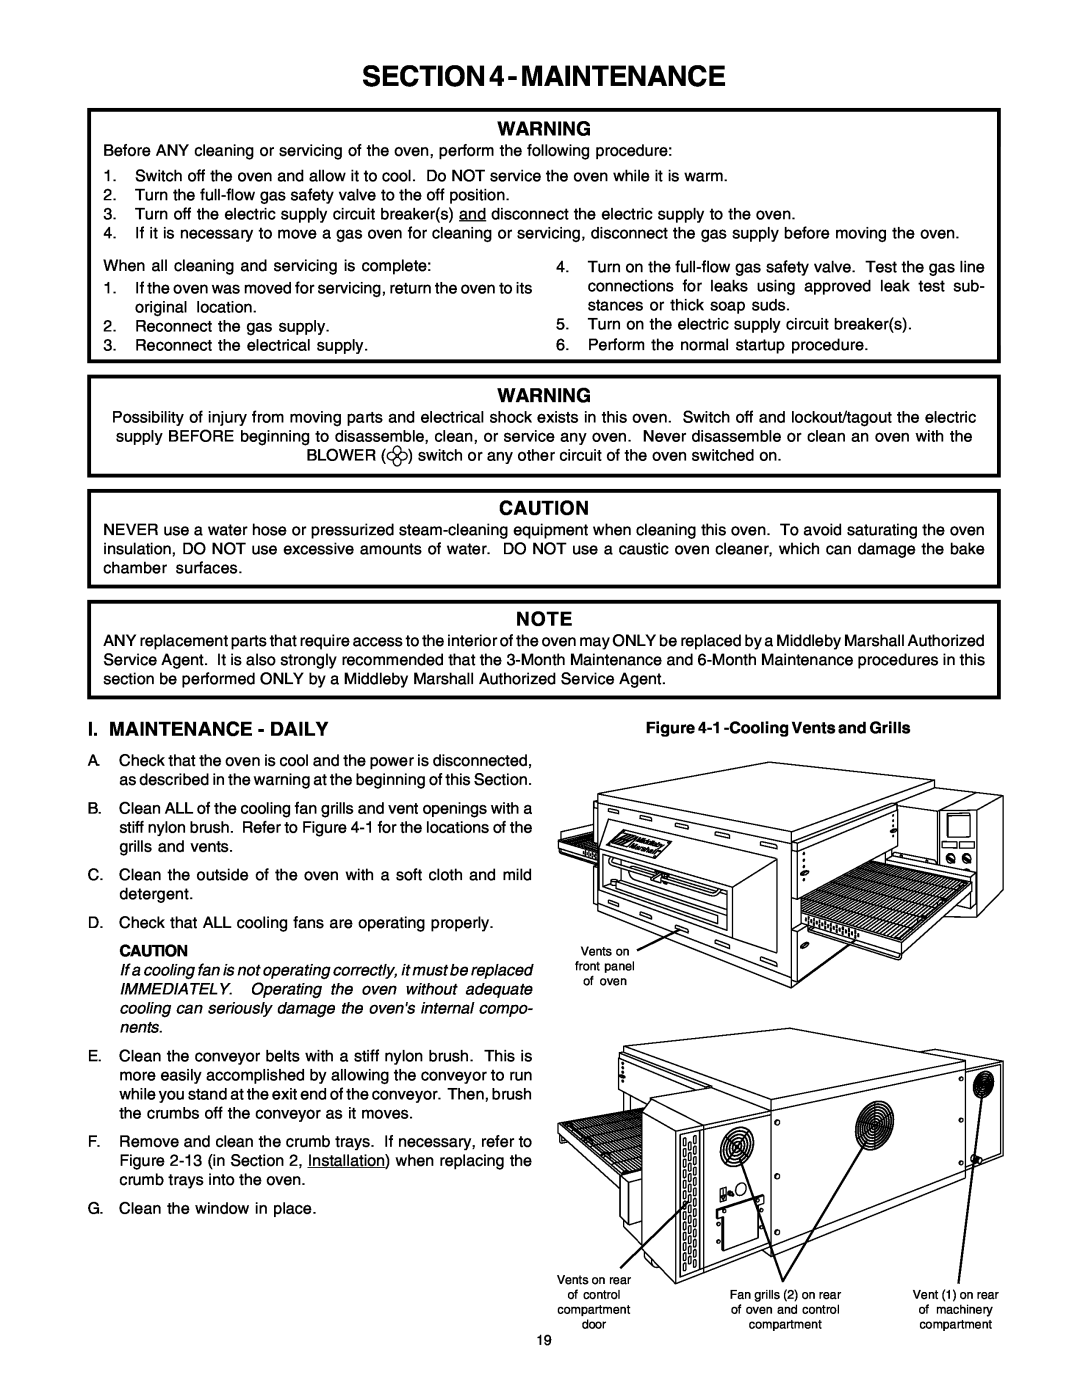 Middleby Marshall PS53GS Gas manual I. Maintenance - Daily, 1 -Cooling Vents and Grills 